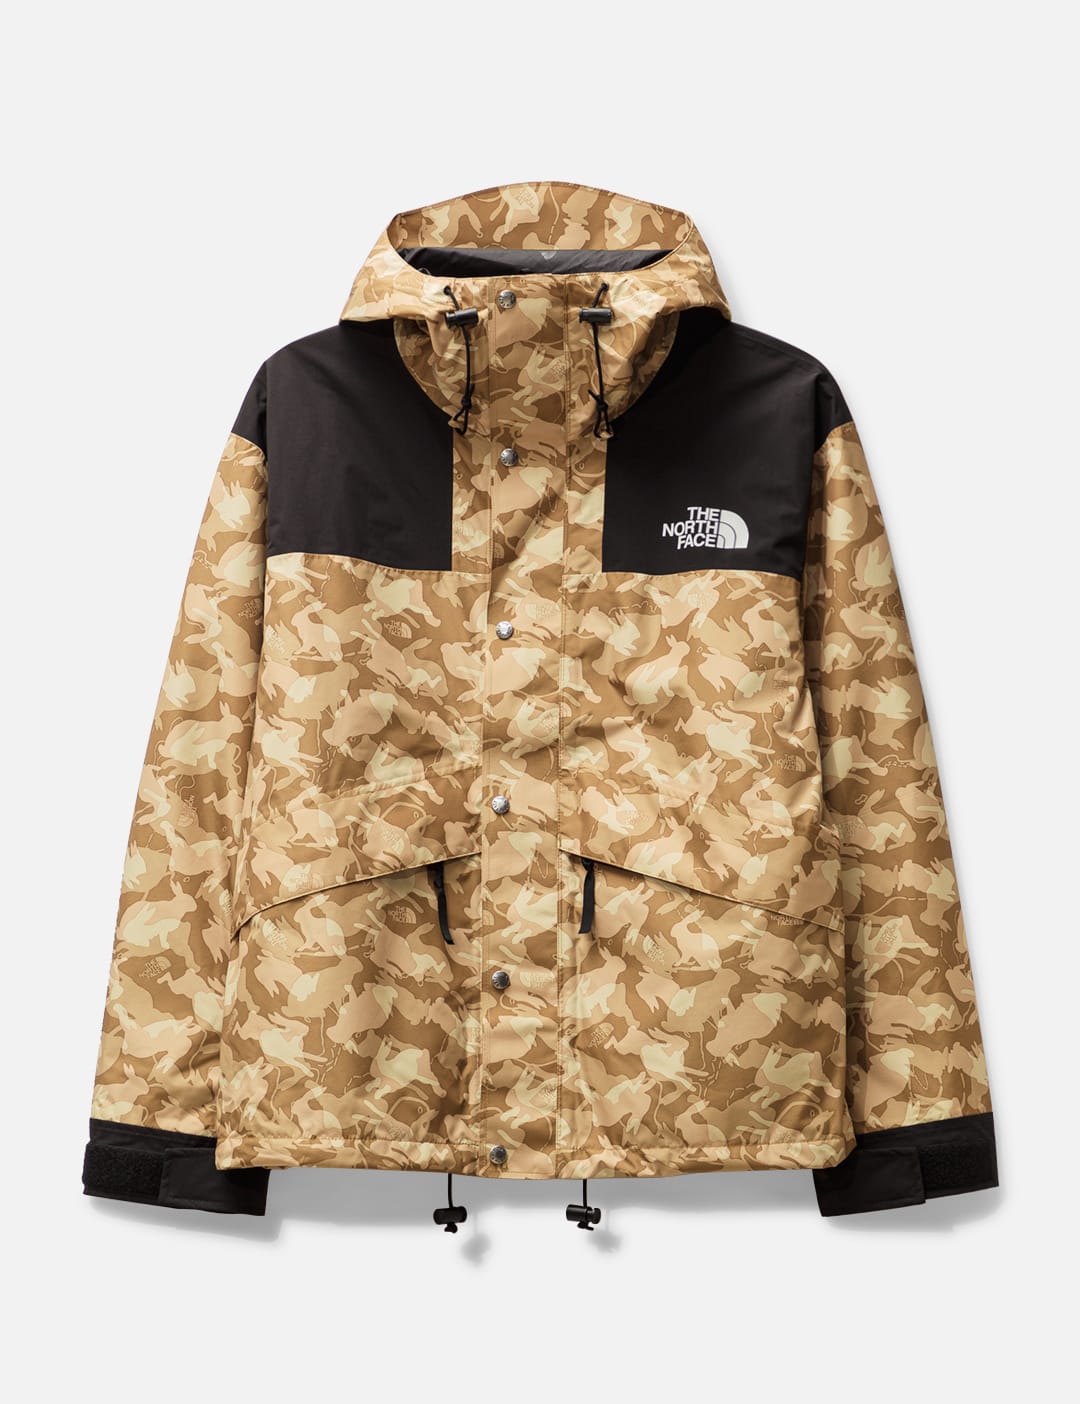 The North Face - M 86 RETRO MOUNTAIN JACKET | HBX - Globally